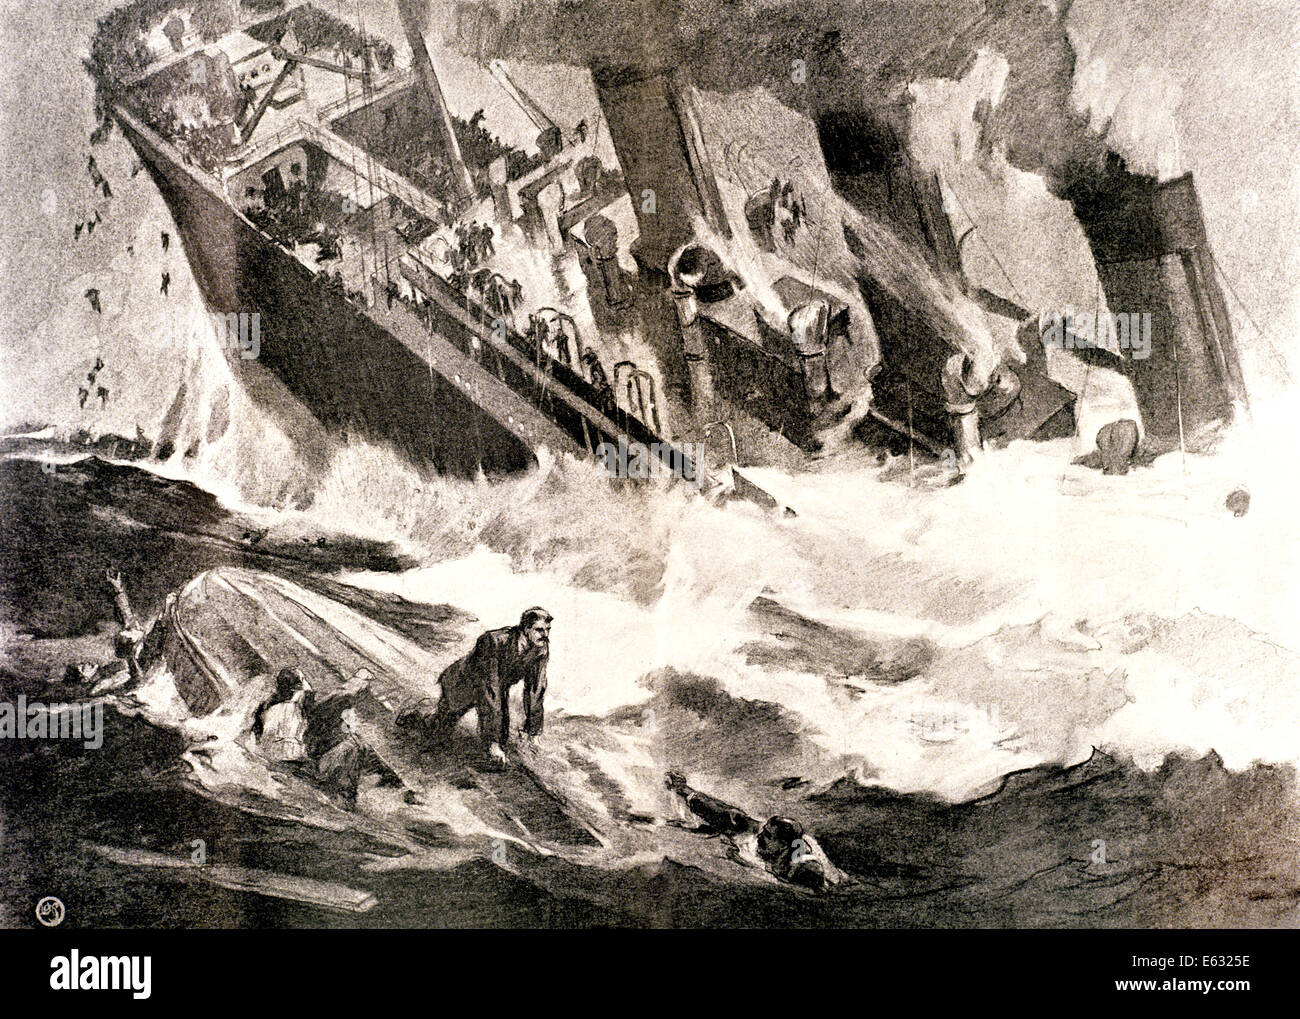 1900s APRIL 15 1912 HARPER'S WEEKLY DRAWING OF THE SINKING OF THE TITANIC OCEAN LINER Stock Photo